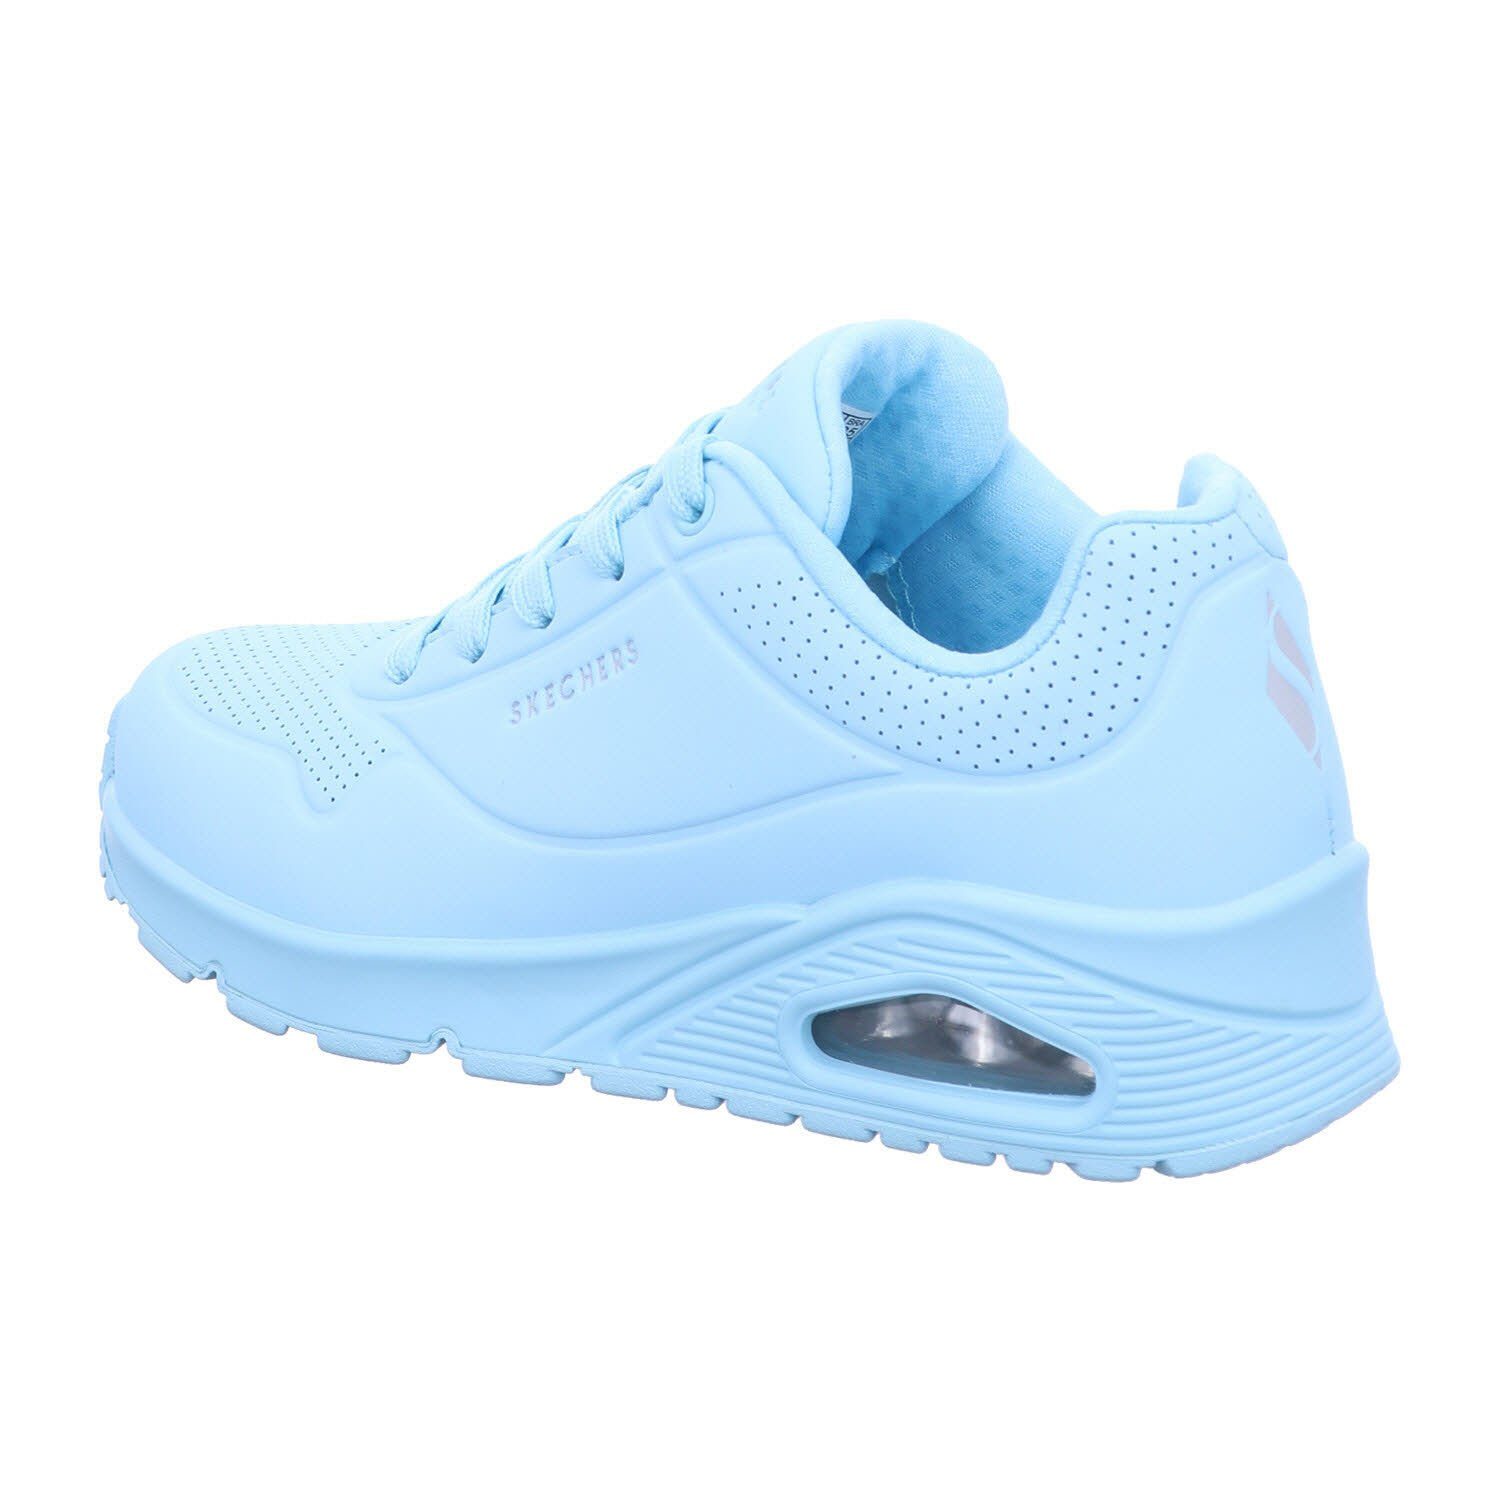 UNO blue STAND Sneaker - ON Skechers (2-tlg) AIR light